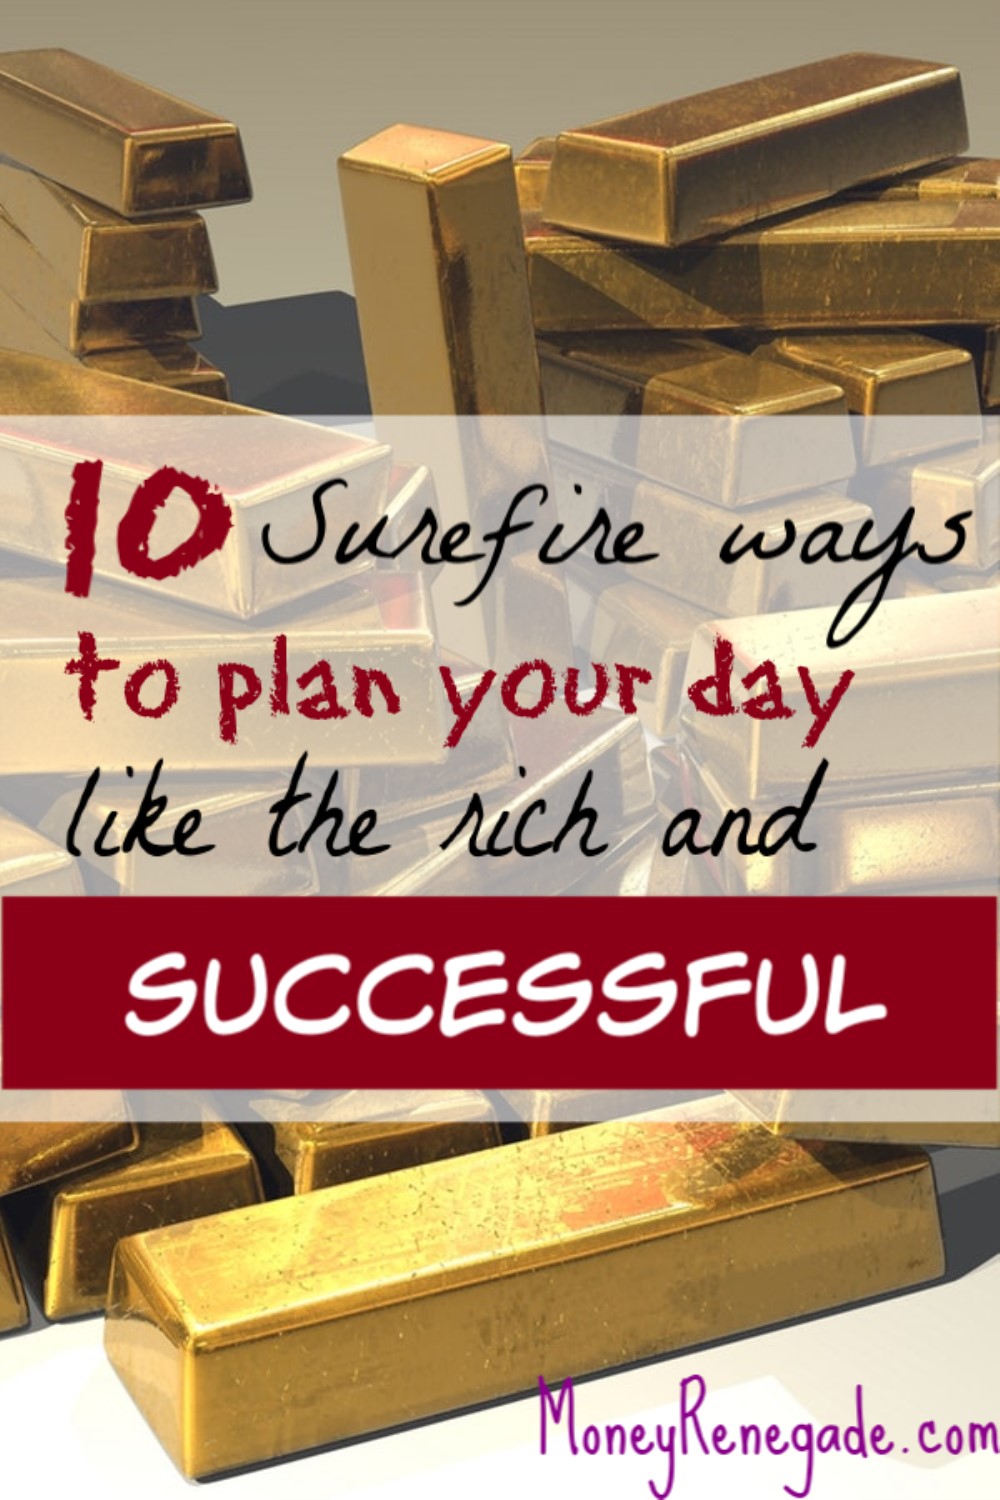 10 Surefire ways to plan your day like the rich and successful